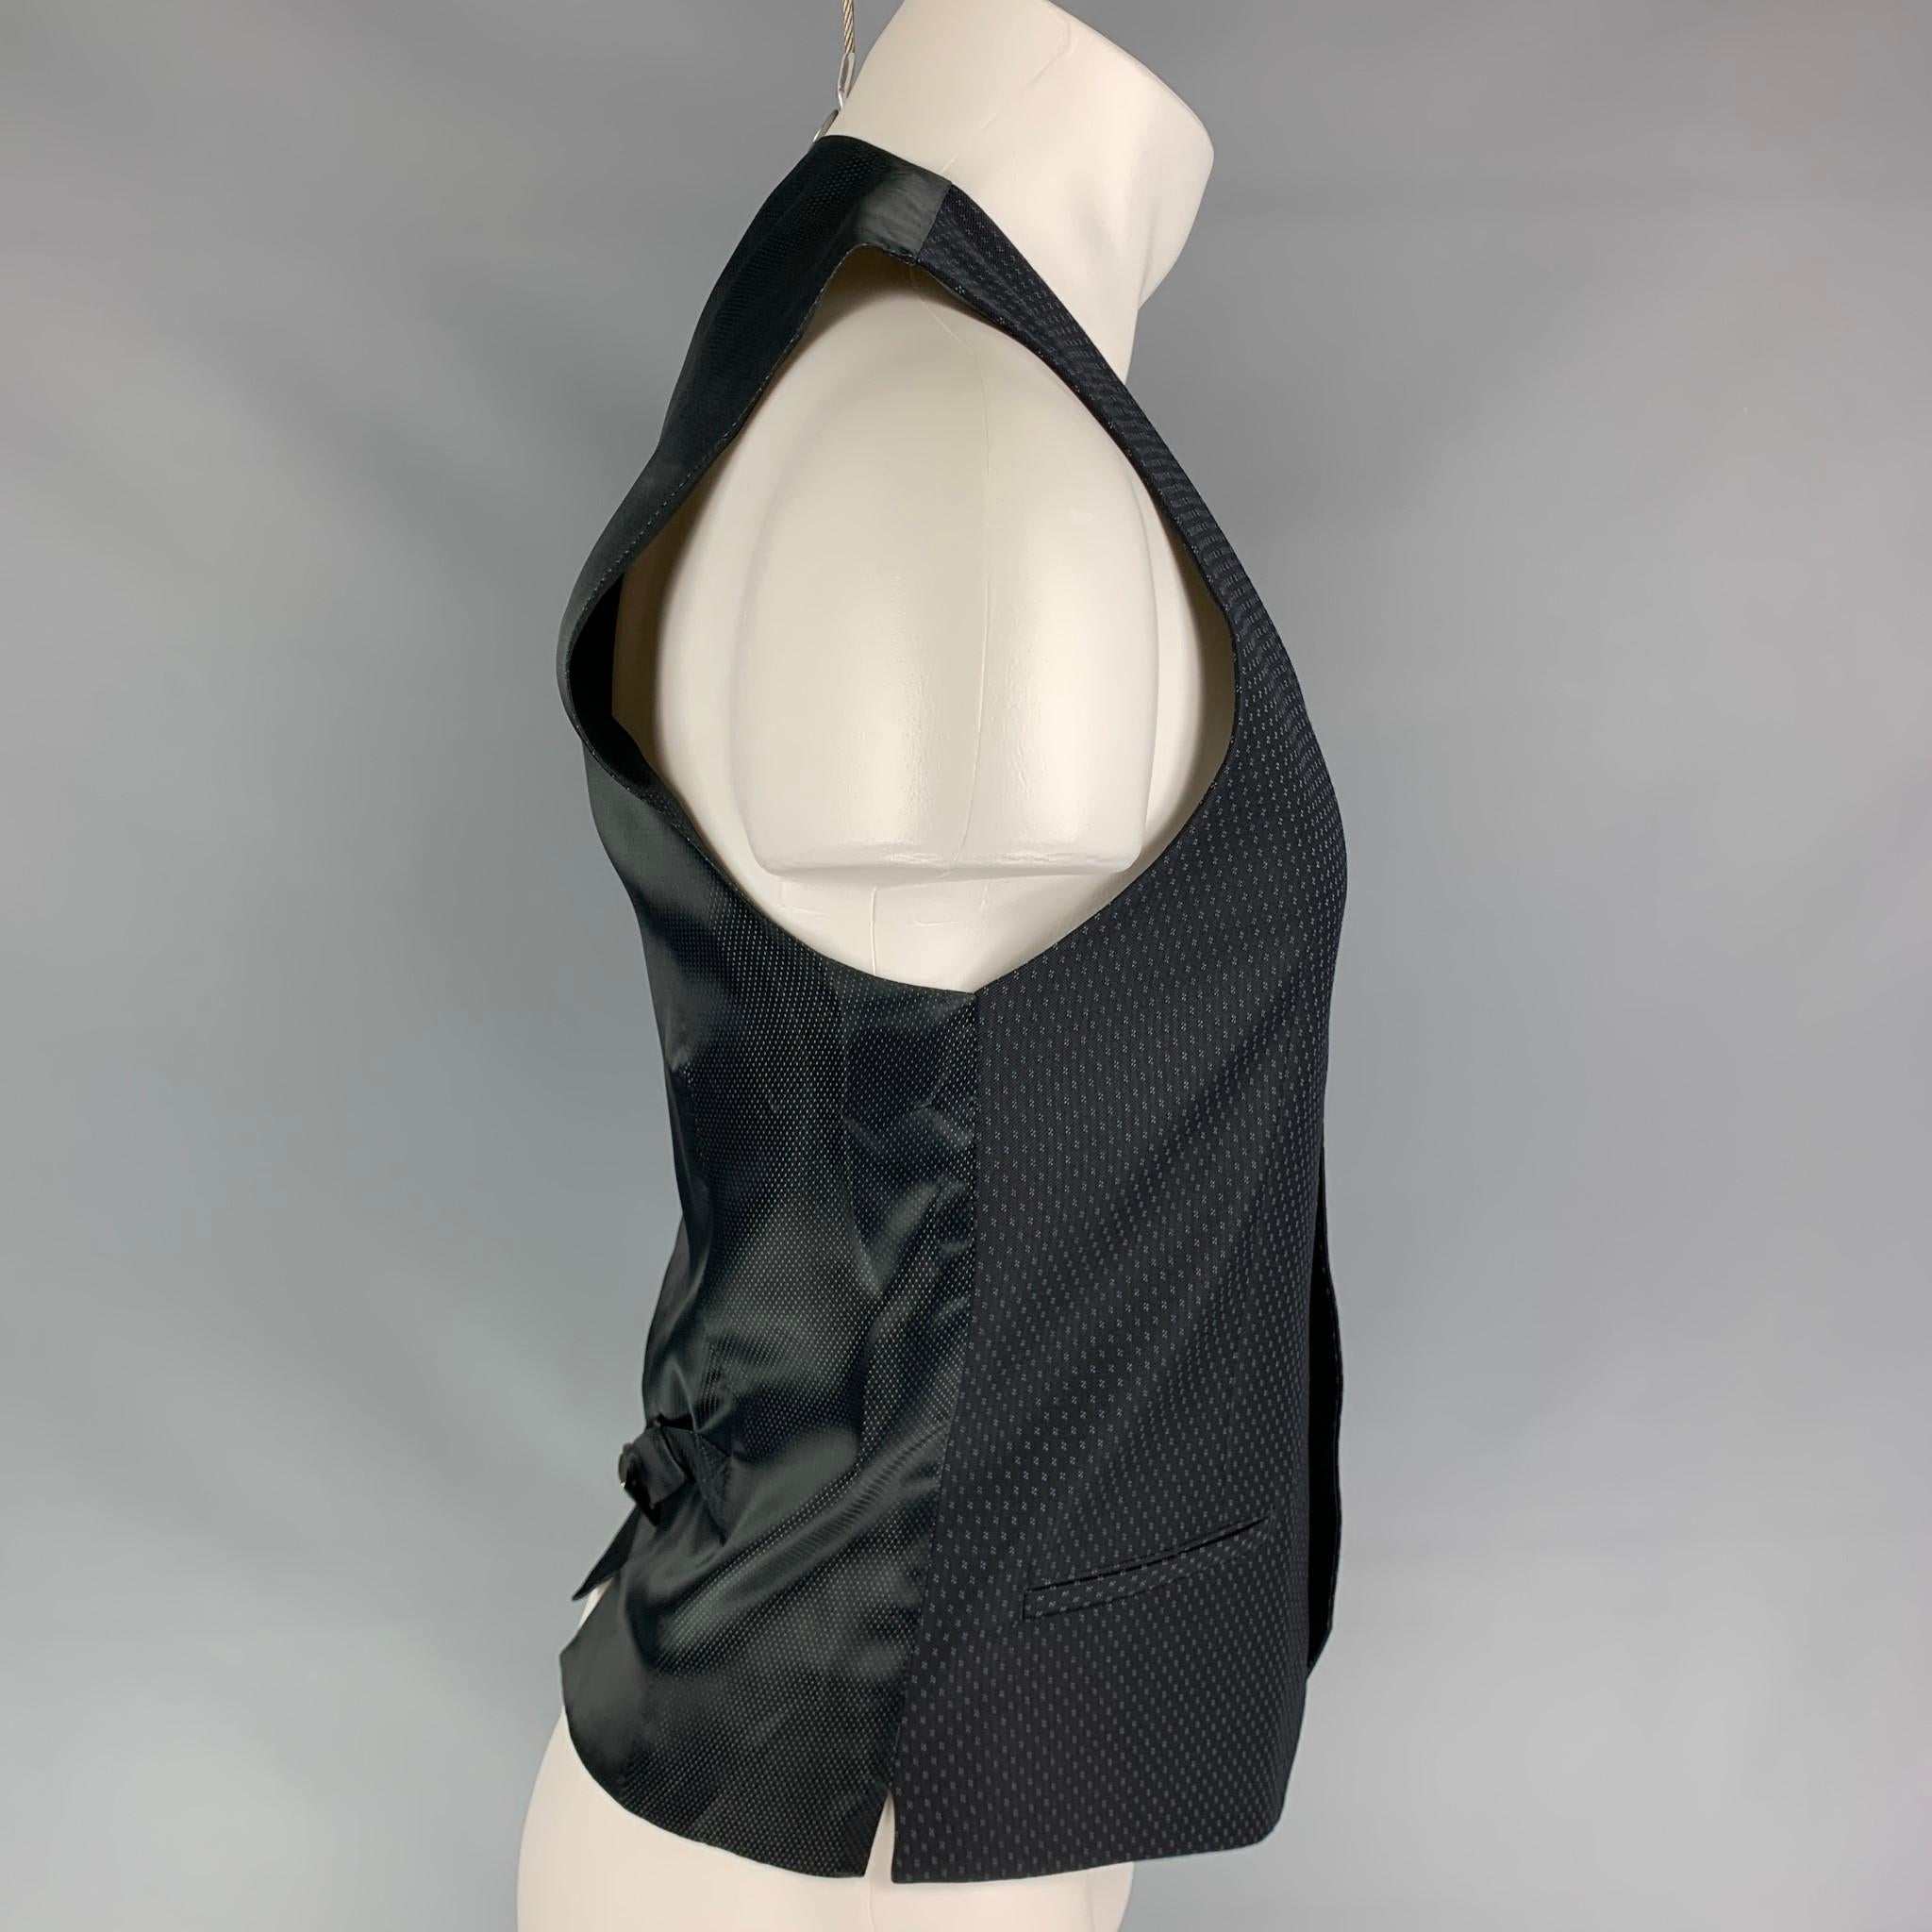 DOLCE & GABBANA vest comes in a black nailhead wool featuring a classic style, back belt, slit pockets, and a buttoned closure. Made in Italy.

Very Good Pre-Owned Condition.
Marked: 46

Measurements:

Shoulder: 13 in.
Chest: 36 in.
Length: 23.5 in.